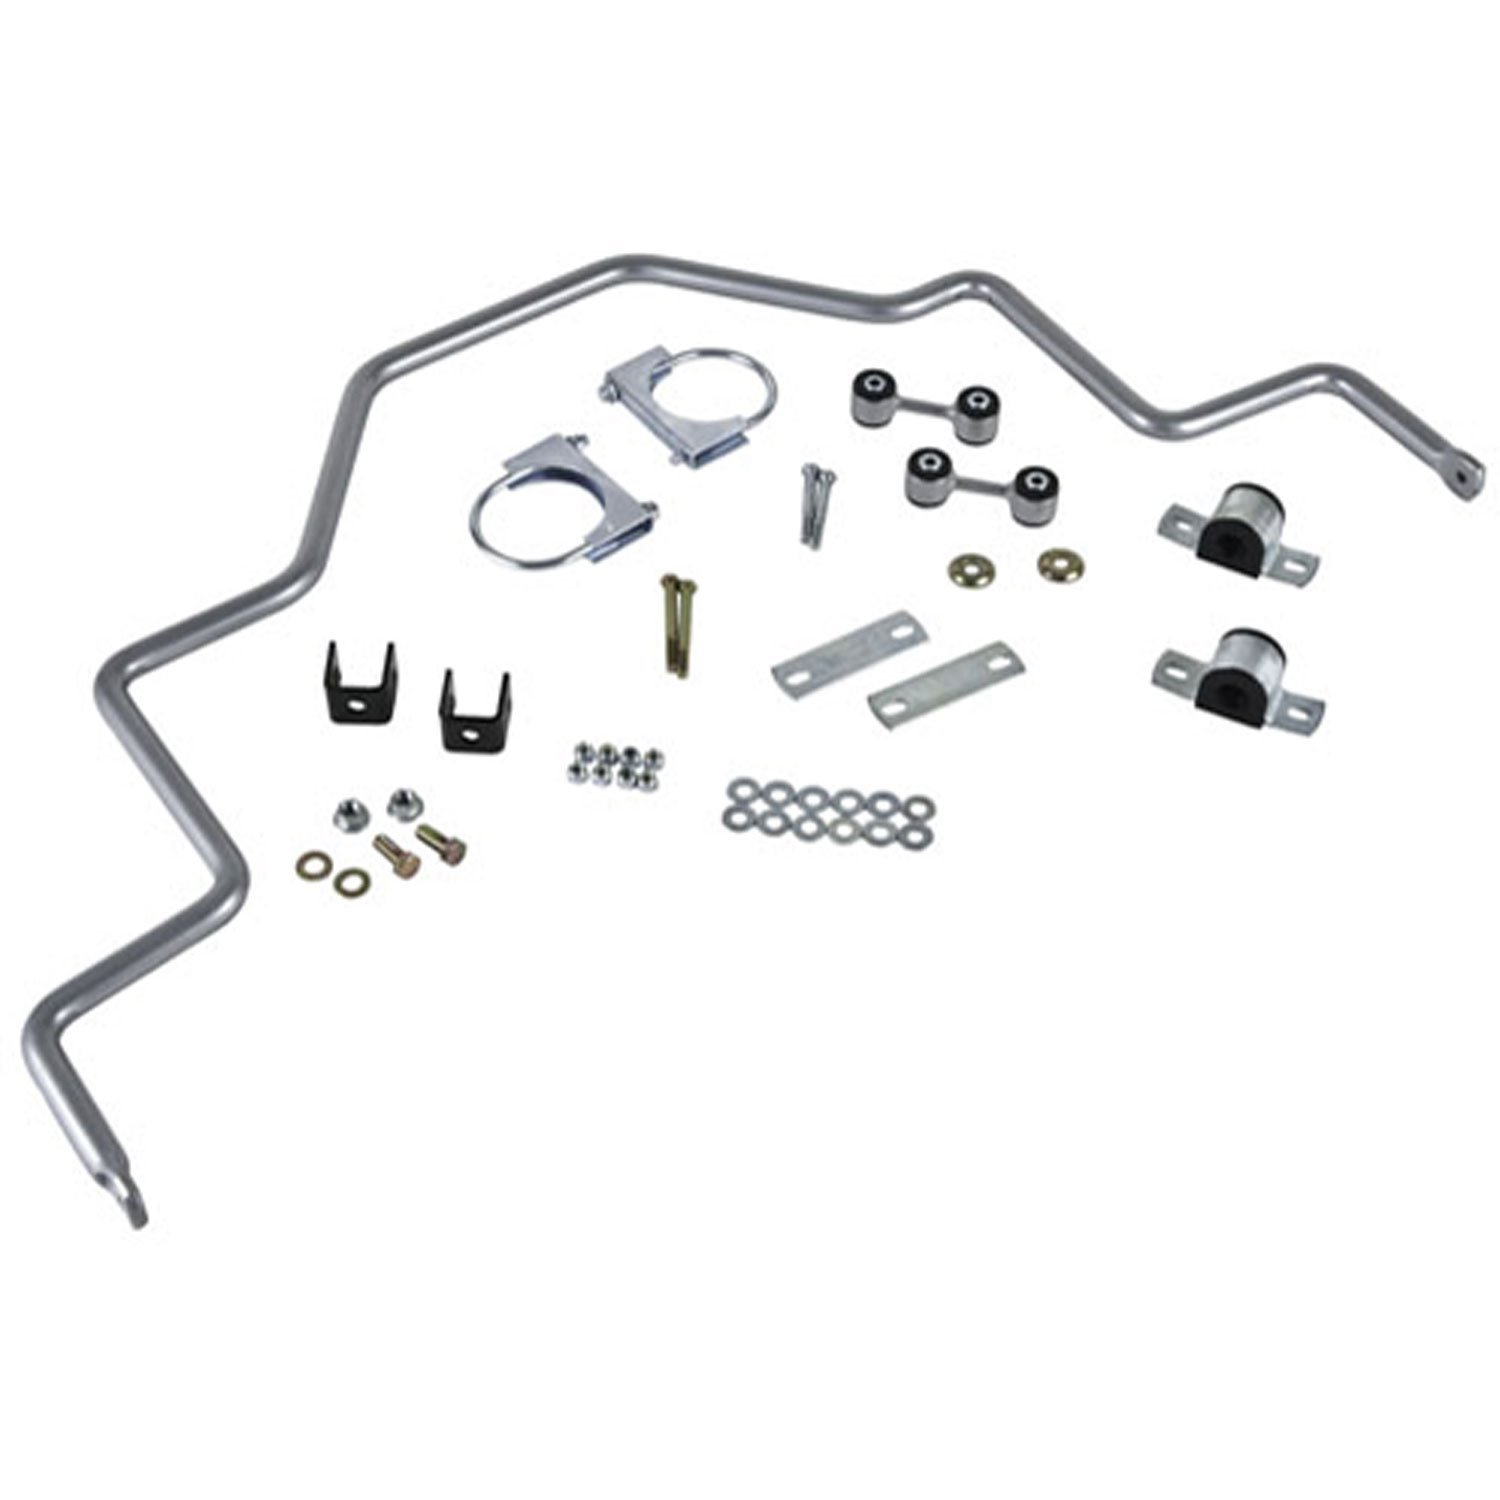 Rear Sway Bar Kit for 2015-2018 Ford F-150